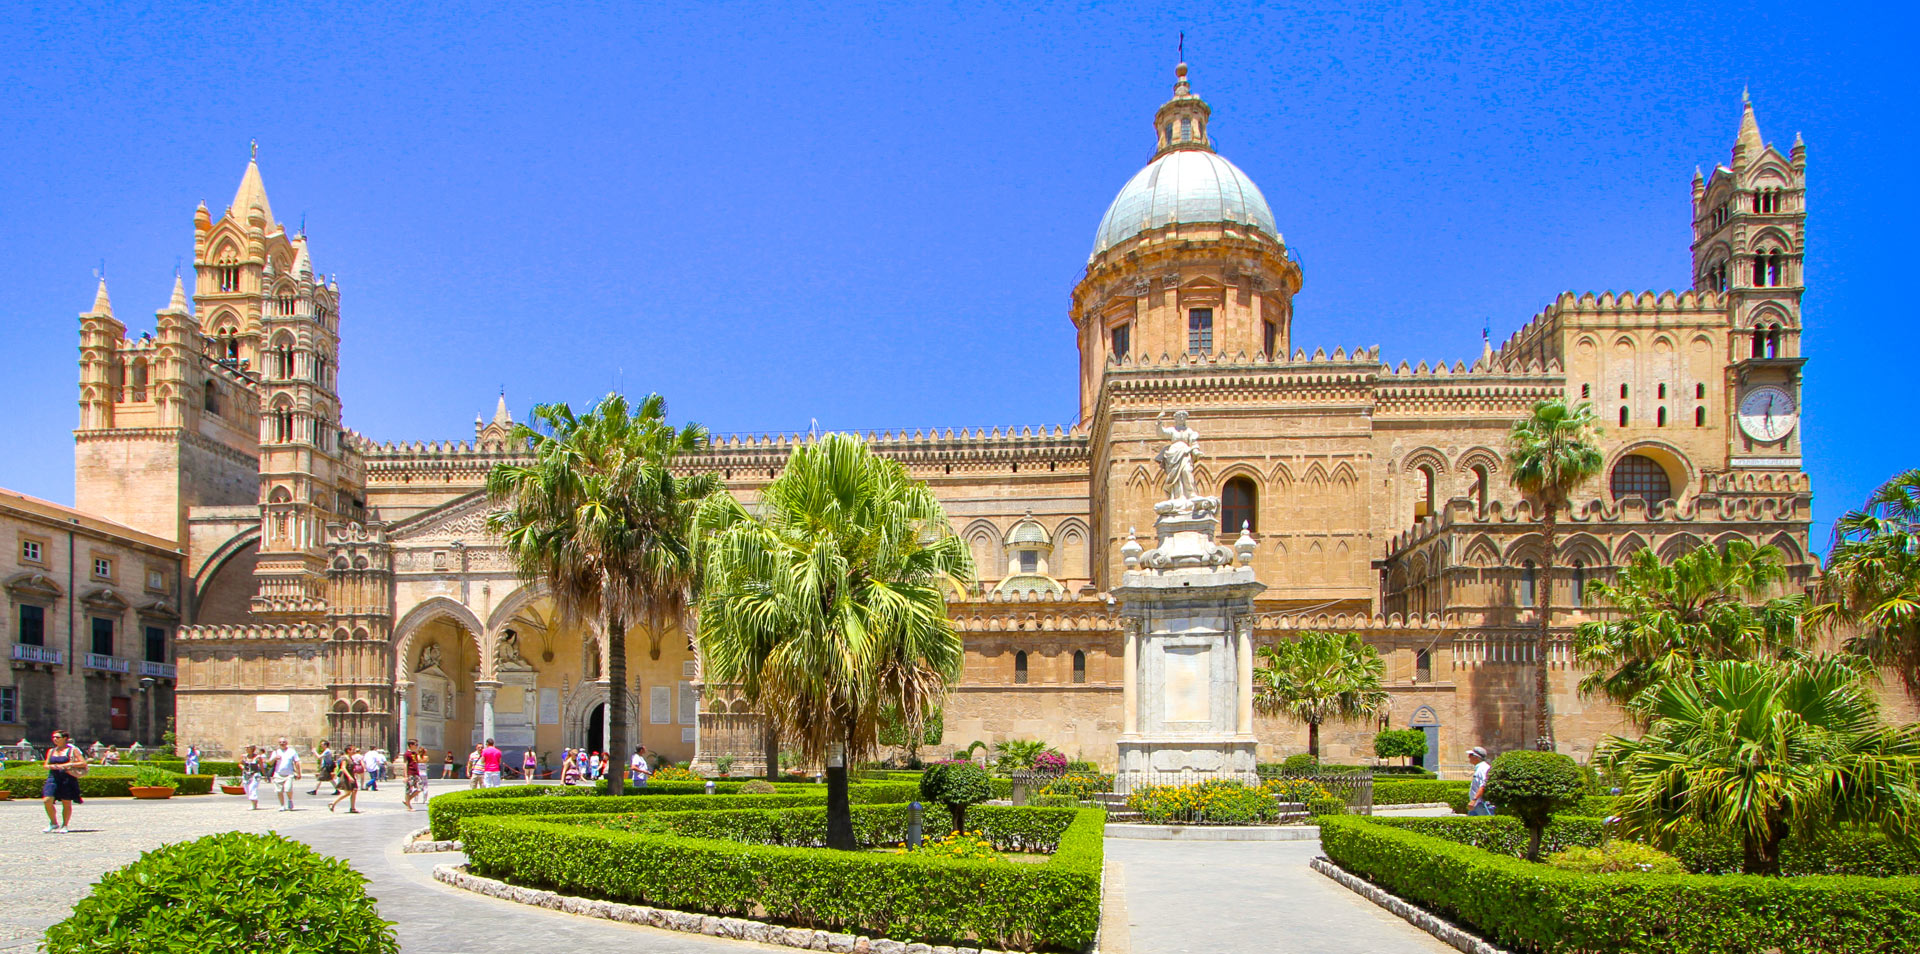 things to do in Palermo